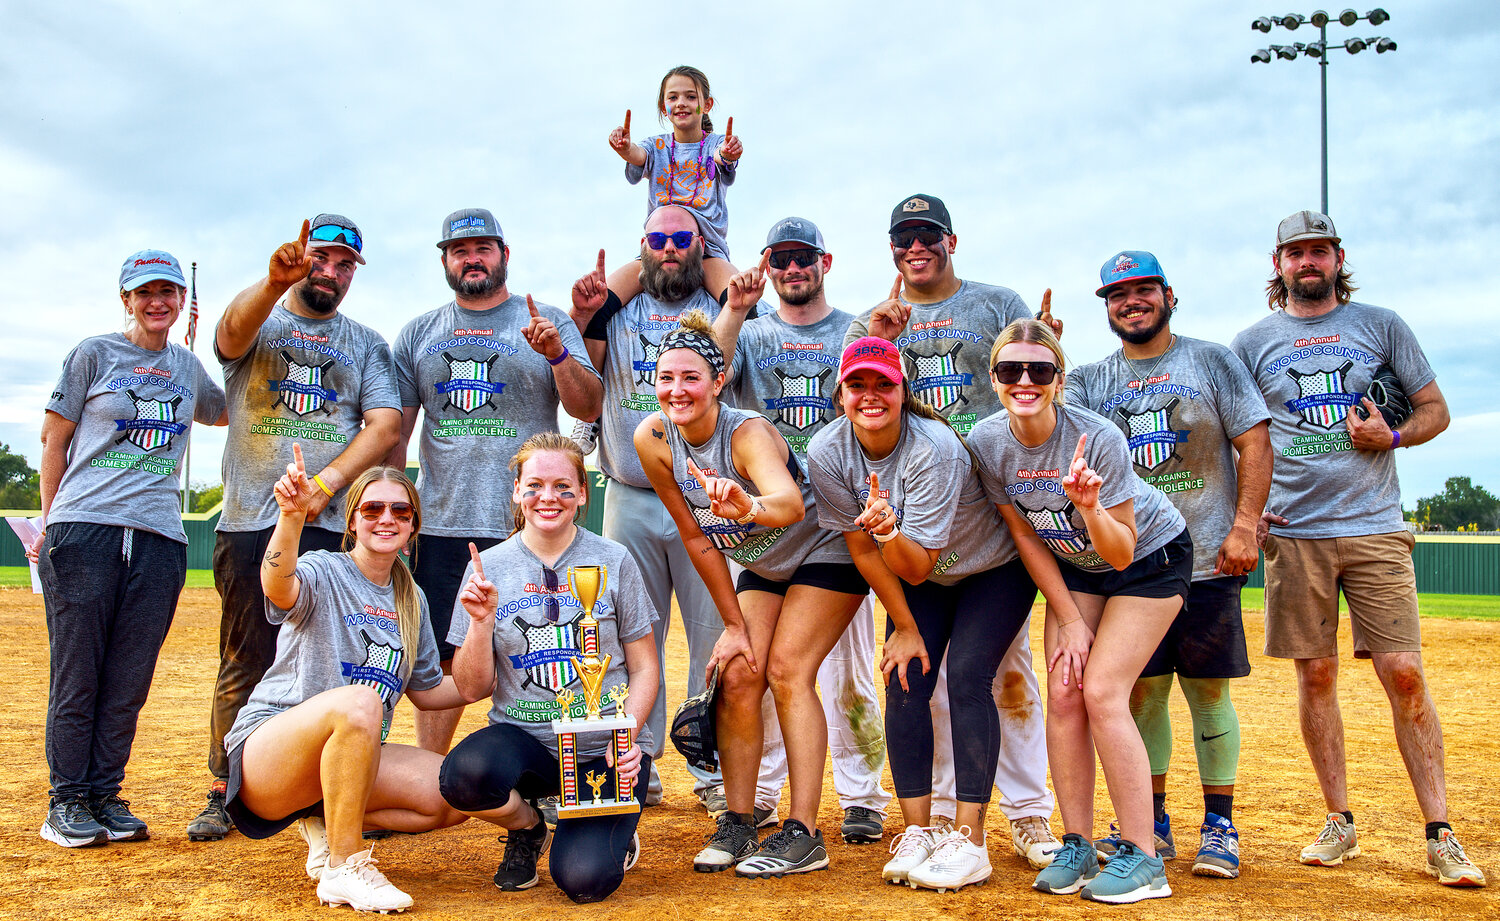 The Mineola police department softball team was crowned champions of the 4th annual first responder tournament sponsored by the district attorney’s office on Saturday, Oct. 21 in Quitman.